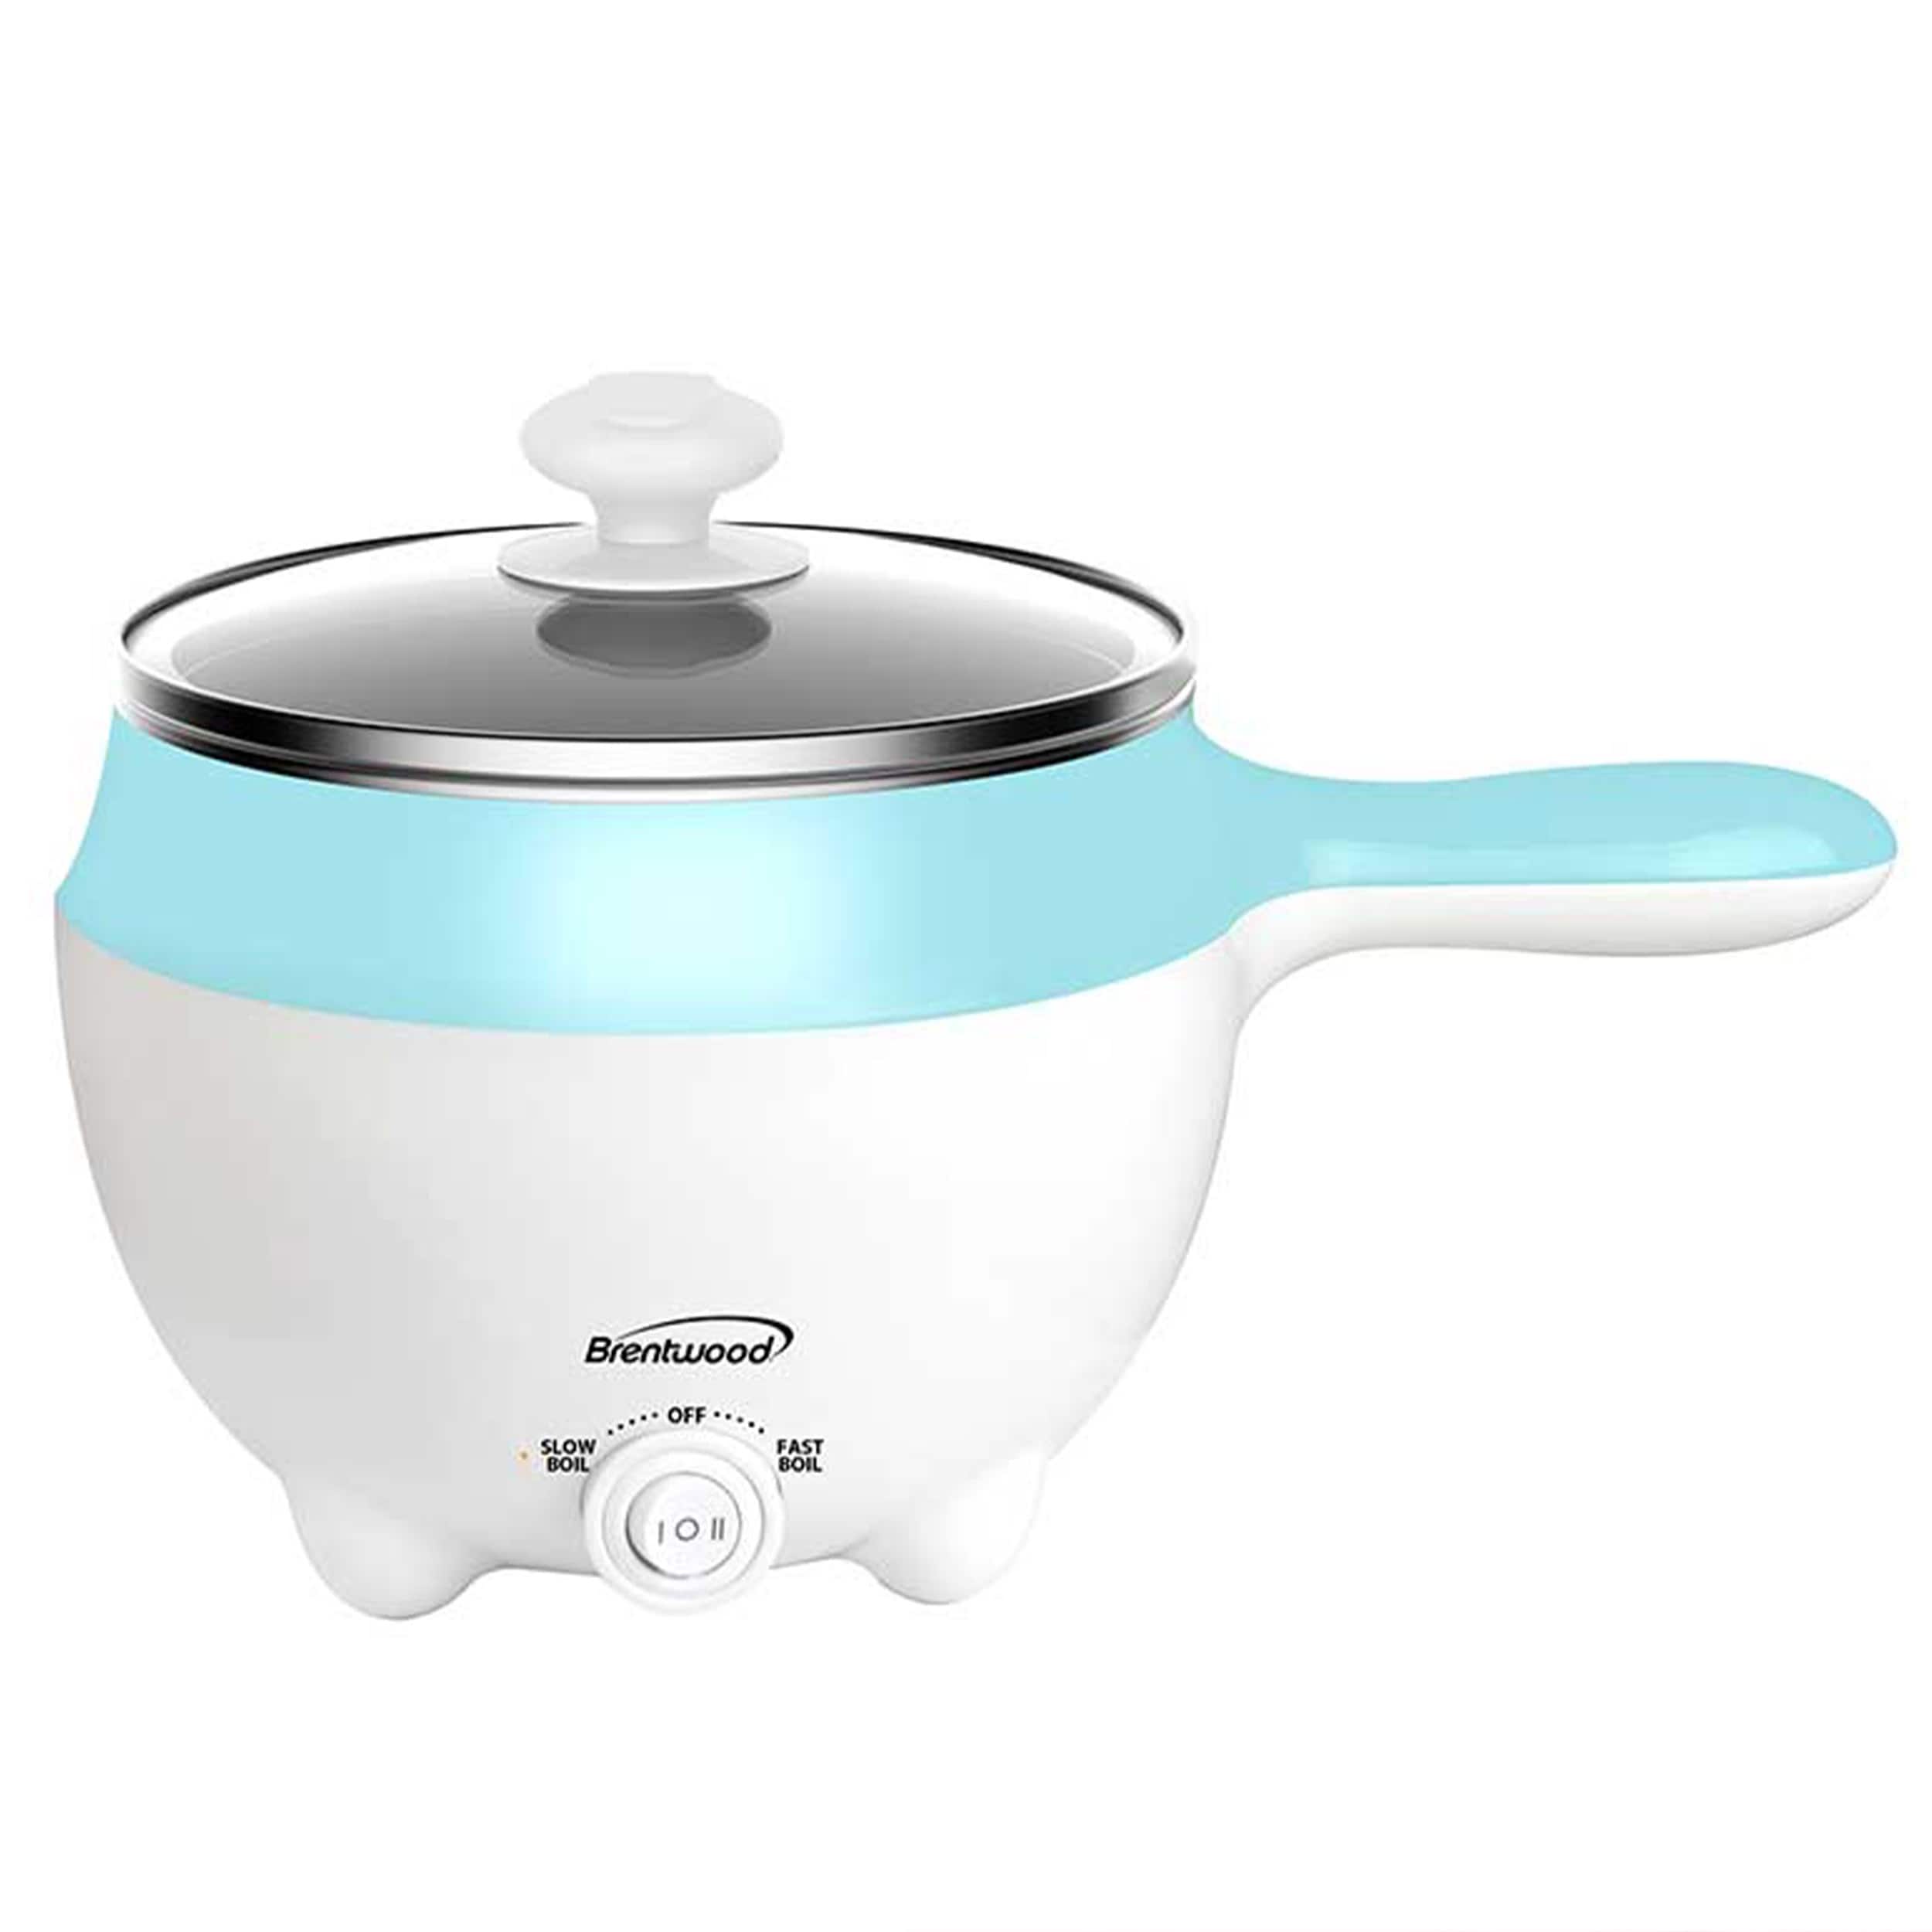 https://ak1.ostkcdn.com/images/products/is/images/direct/f924c2859bc7757fdad631537ba9f9369a1c9316/Brentwood-Stainless-Steel-1.6qt-Electric-Hot-Pot-Cooker-and-Steamer.jpg